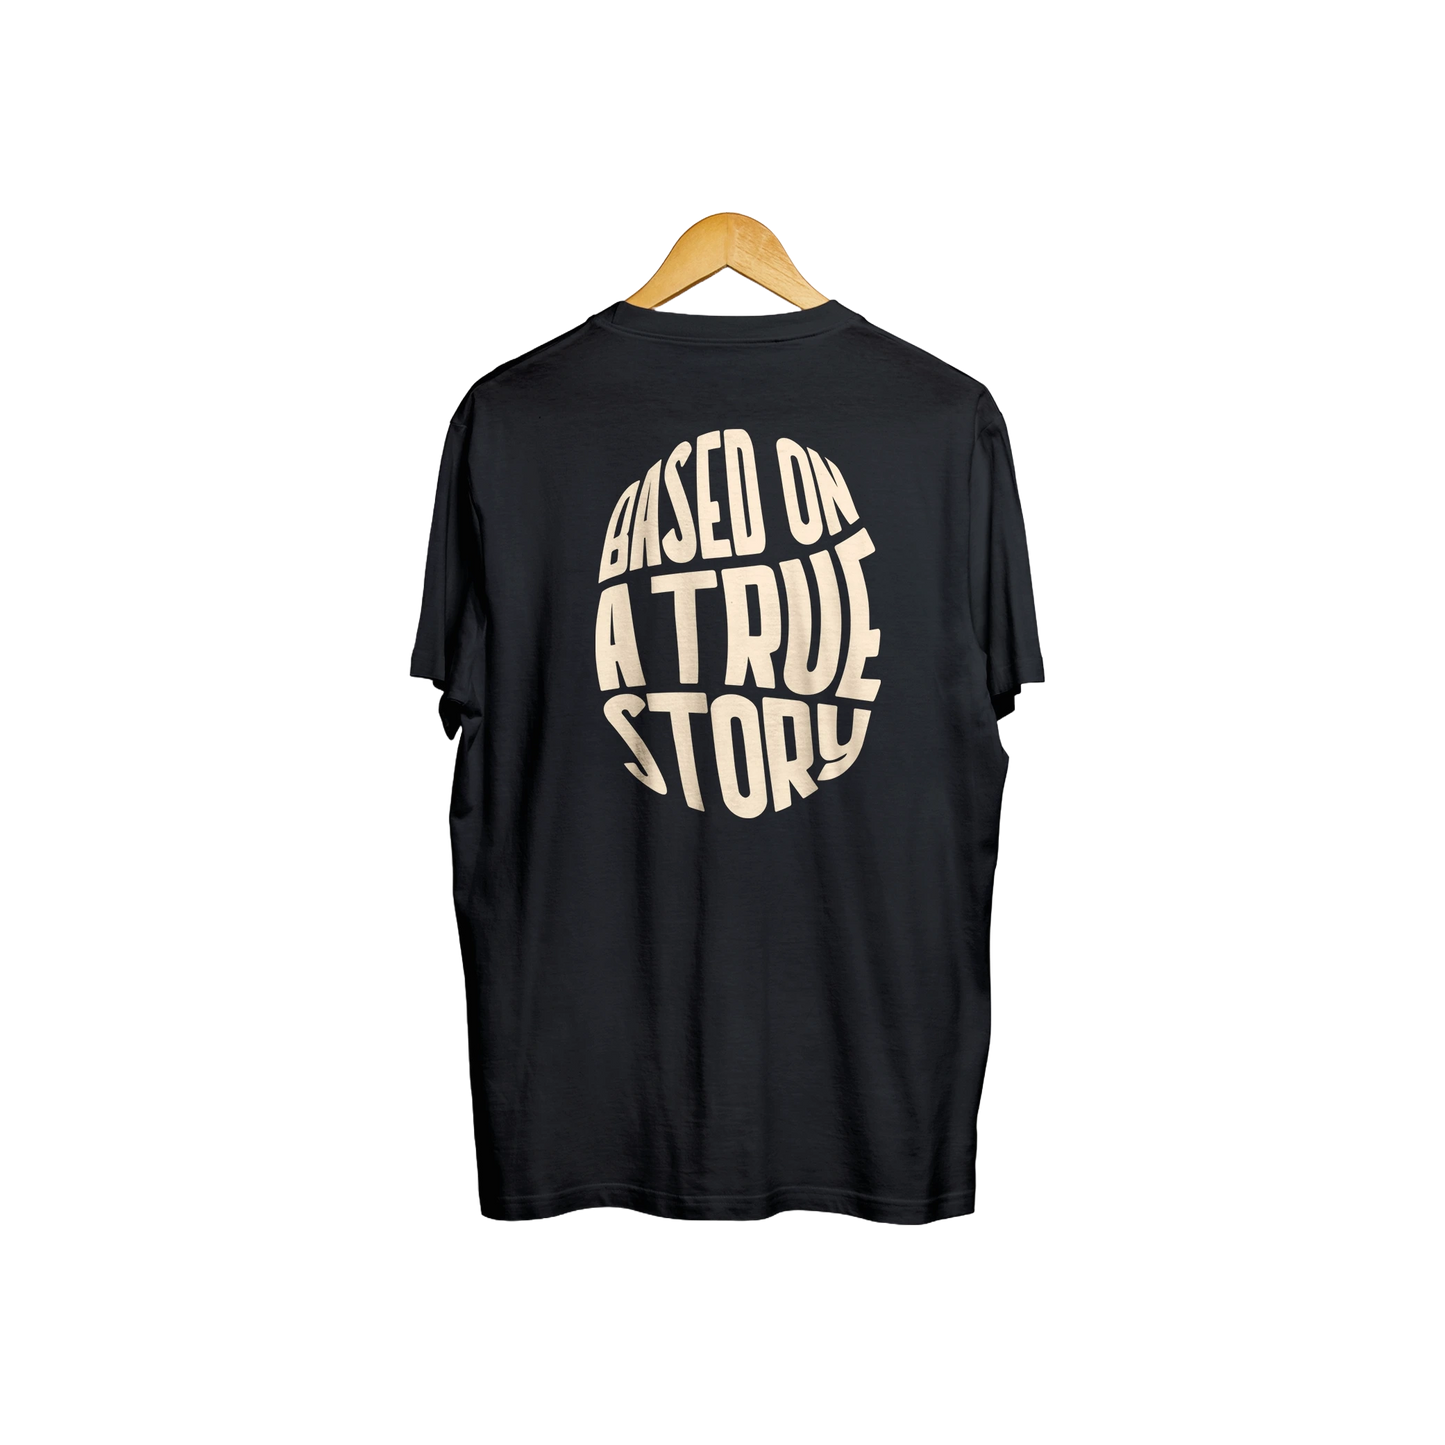 Based On A True Story Tee